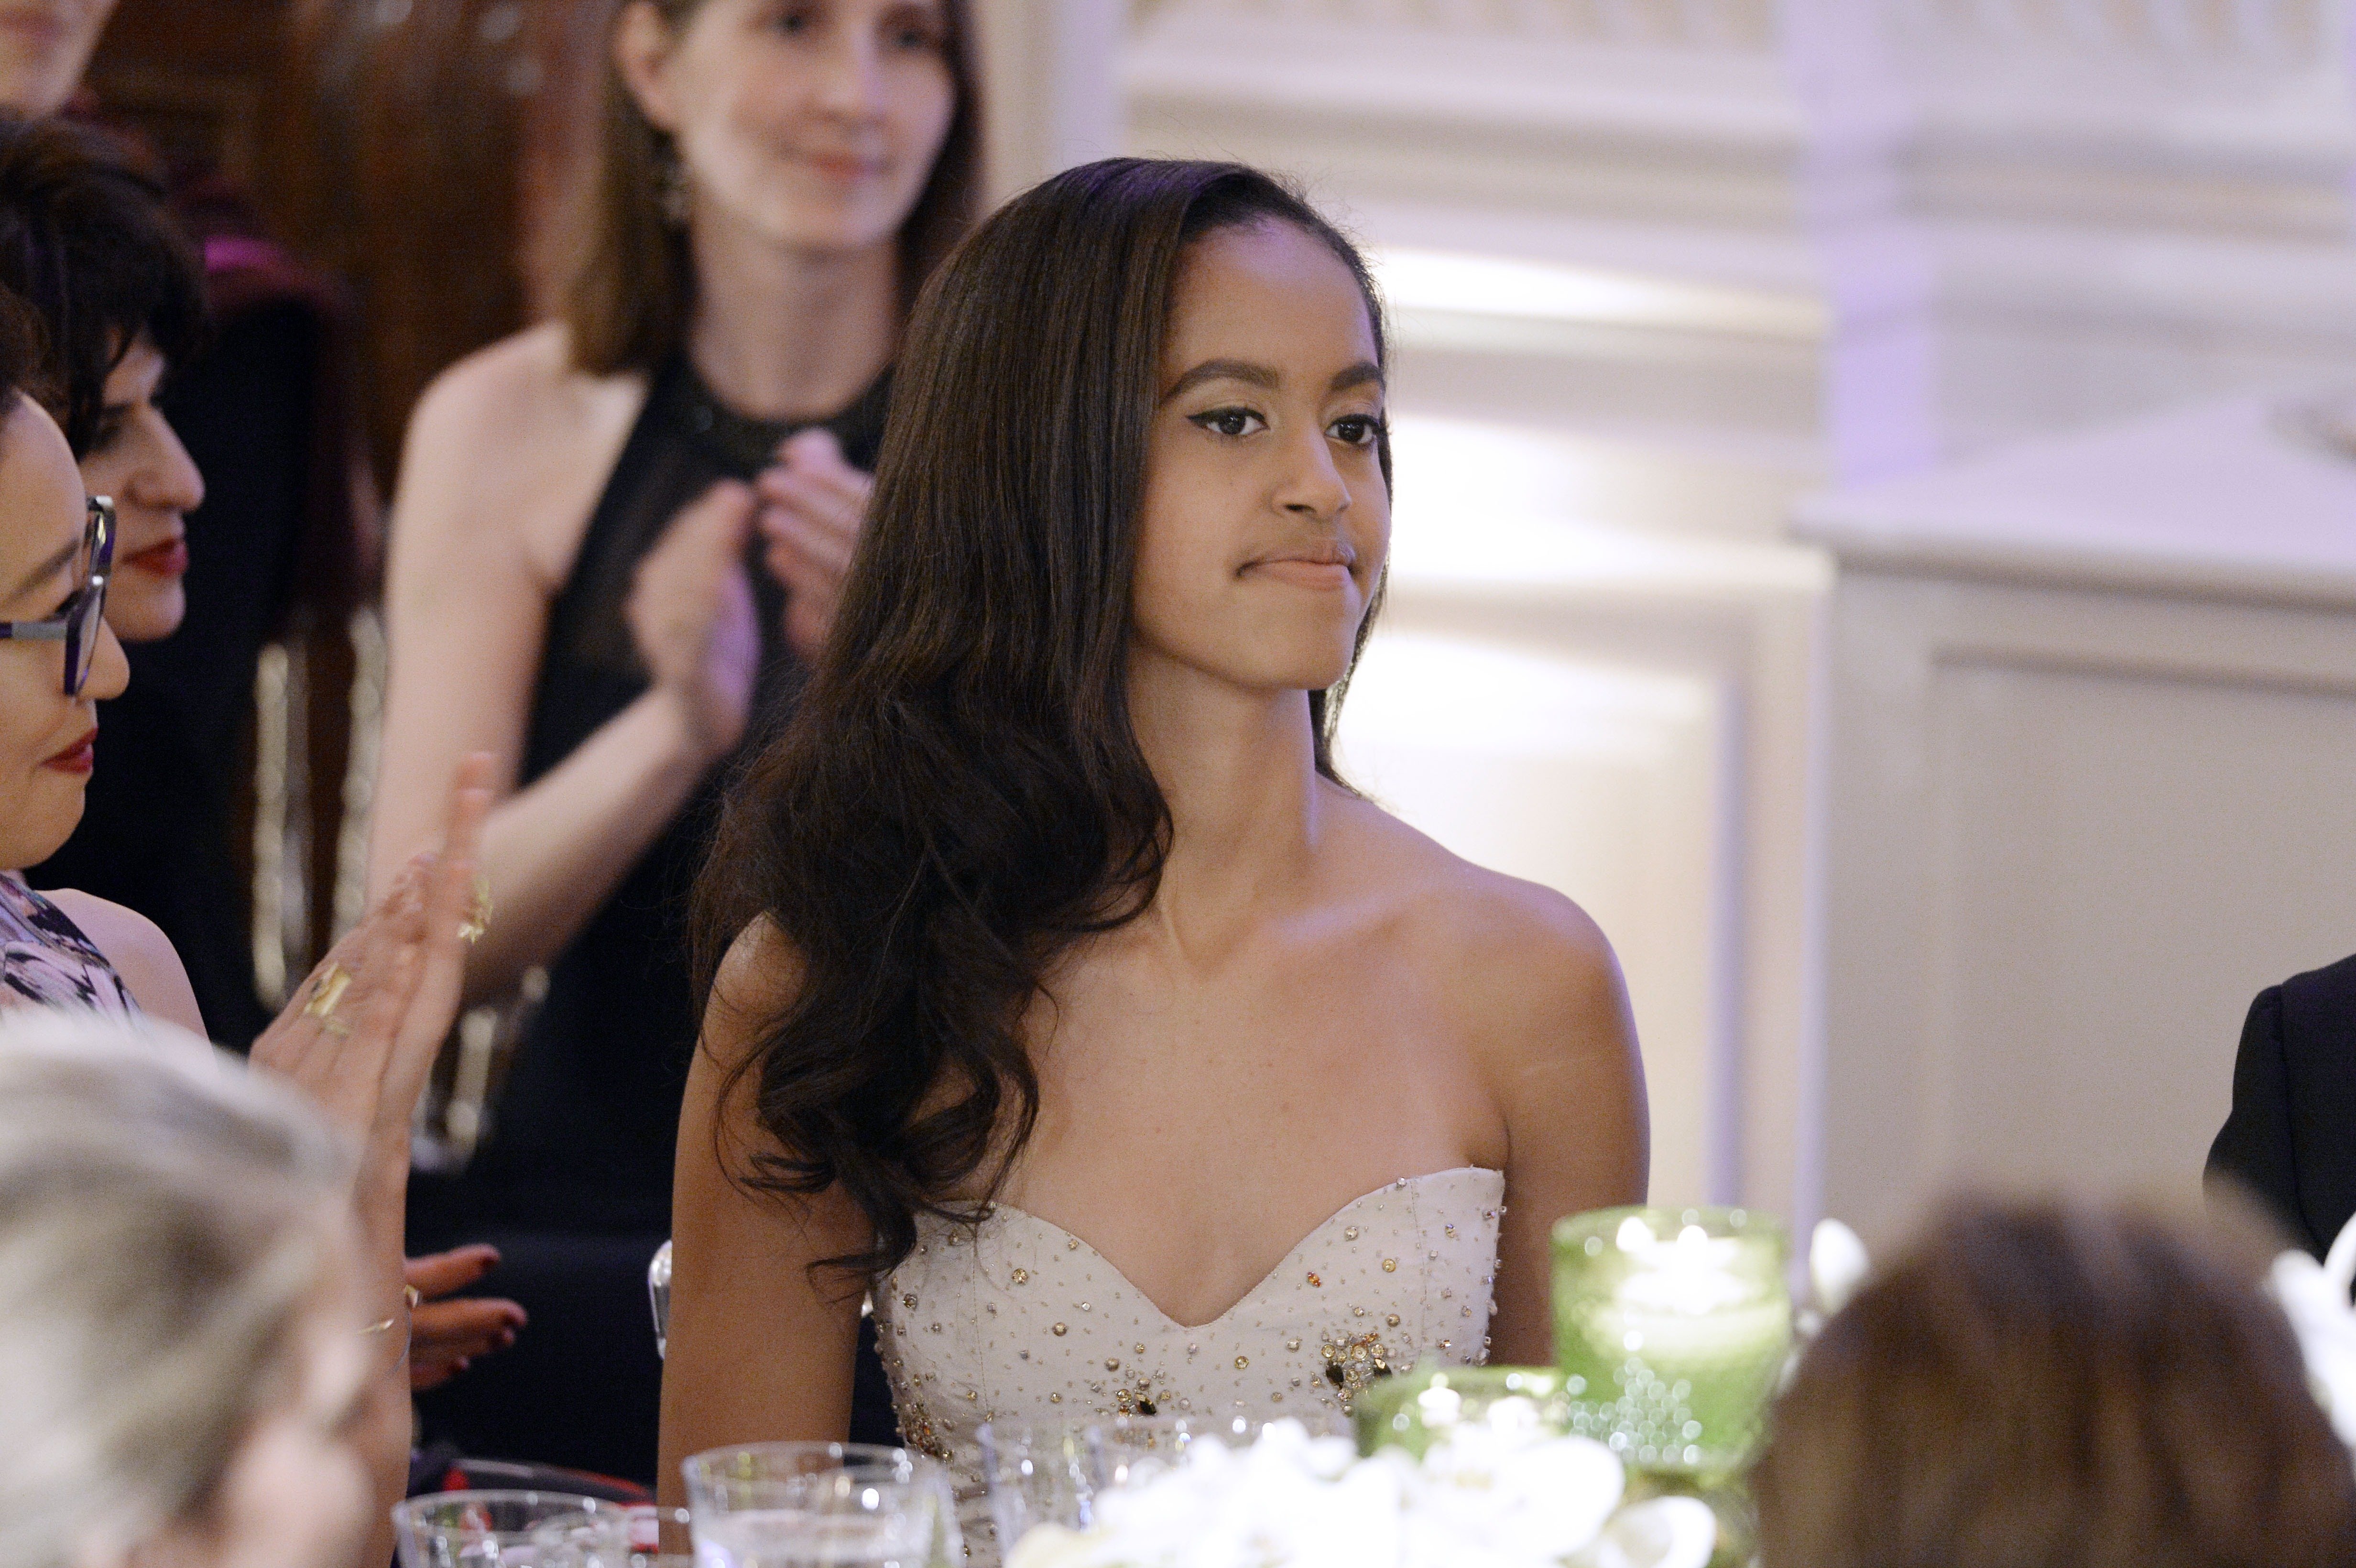 Malia Obama at a State Dinner at the White House on March 10, 2016 in Washington, D.C. | Photo: Getty Images